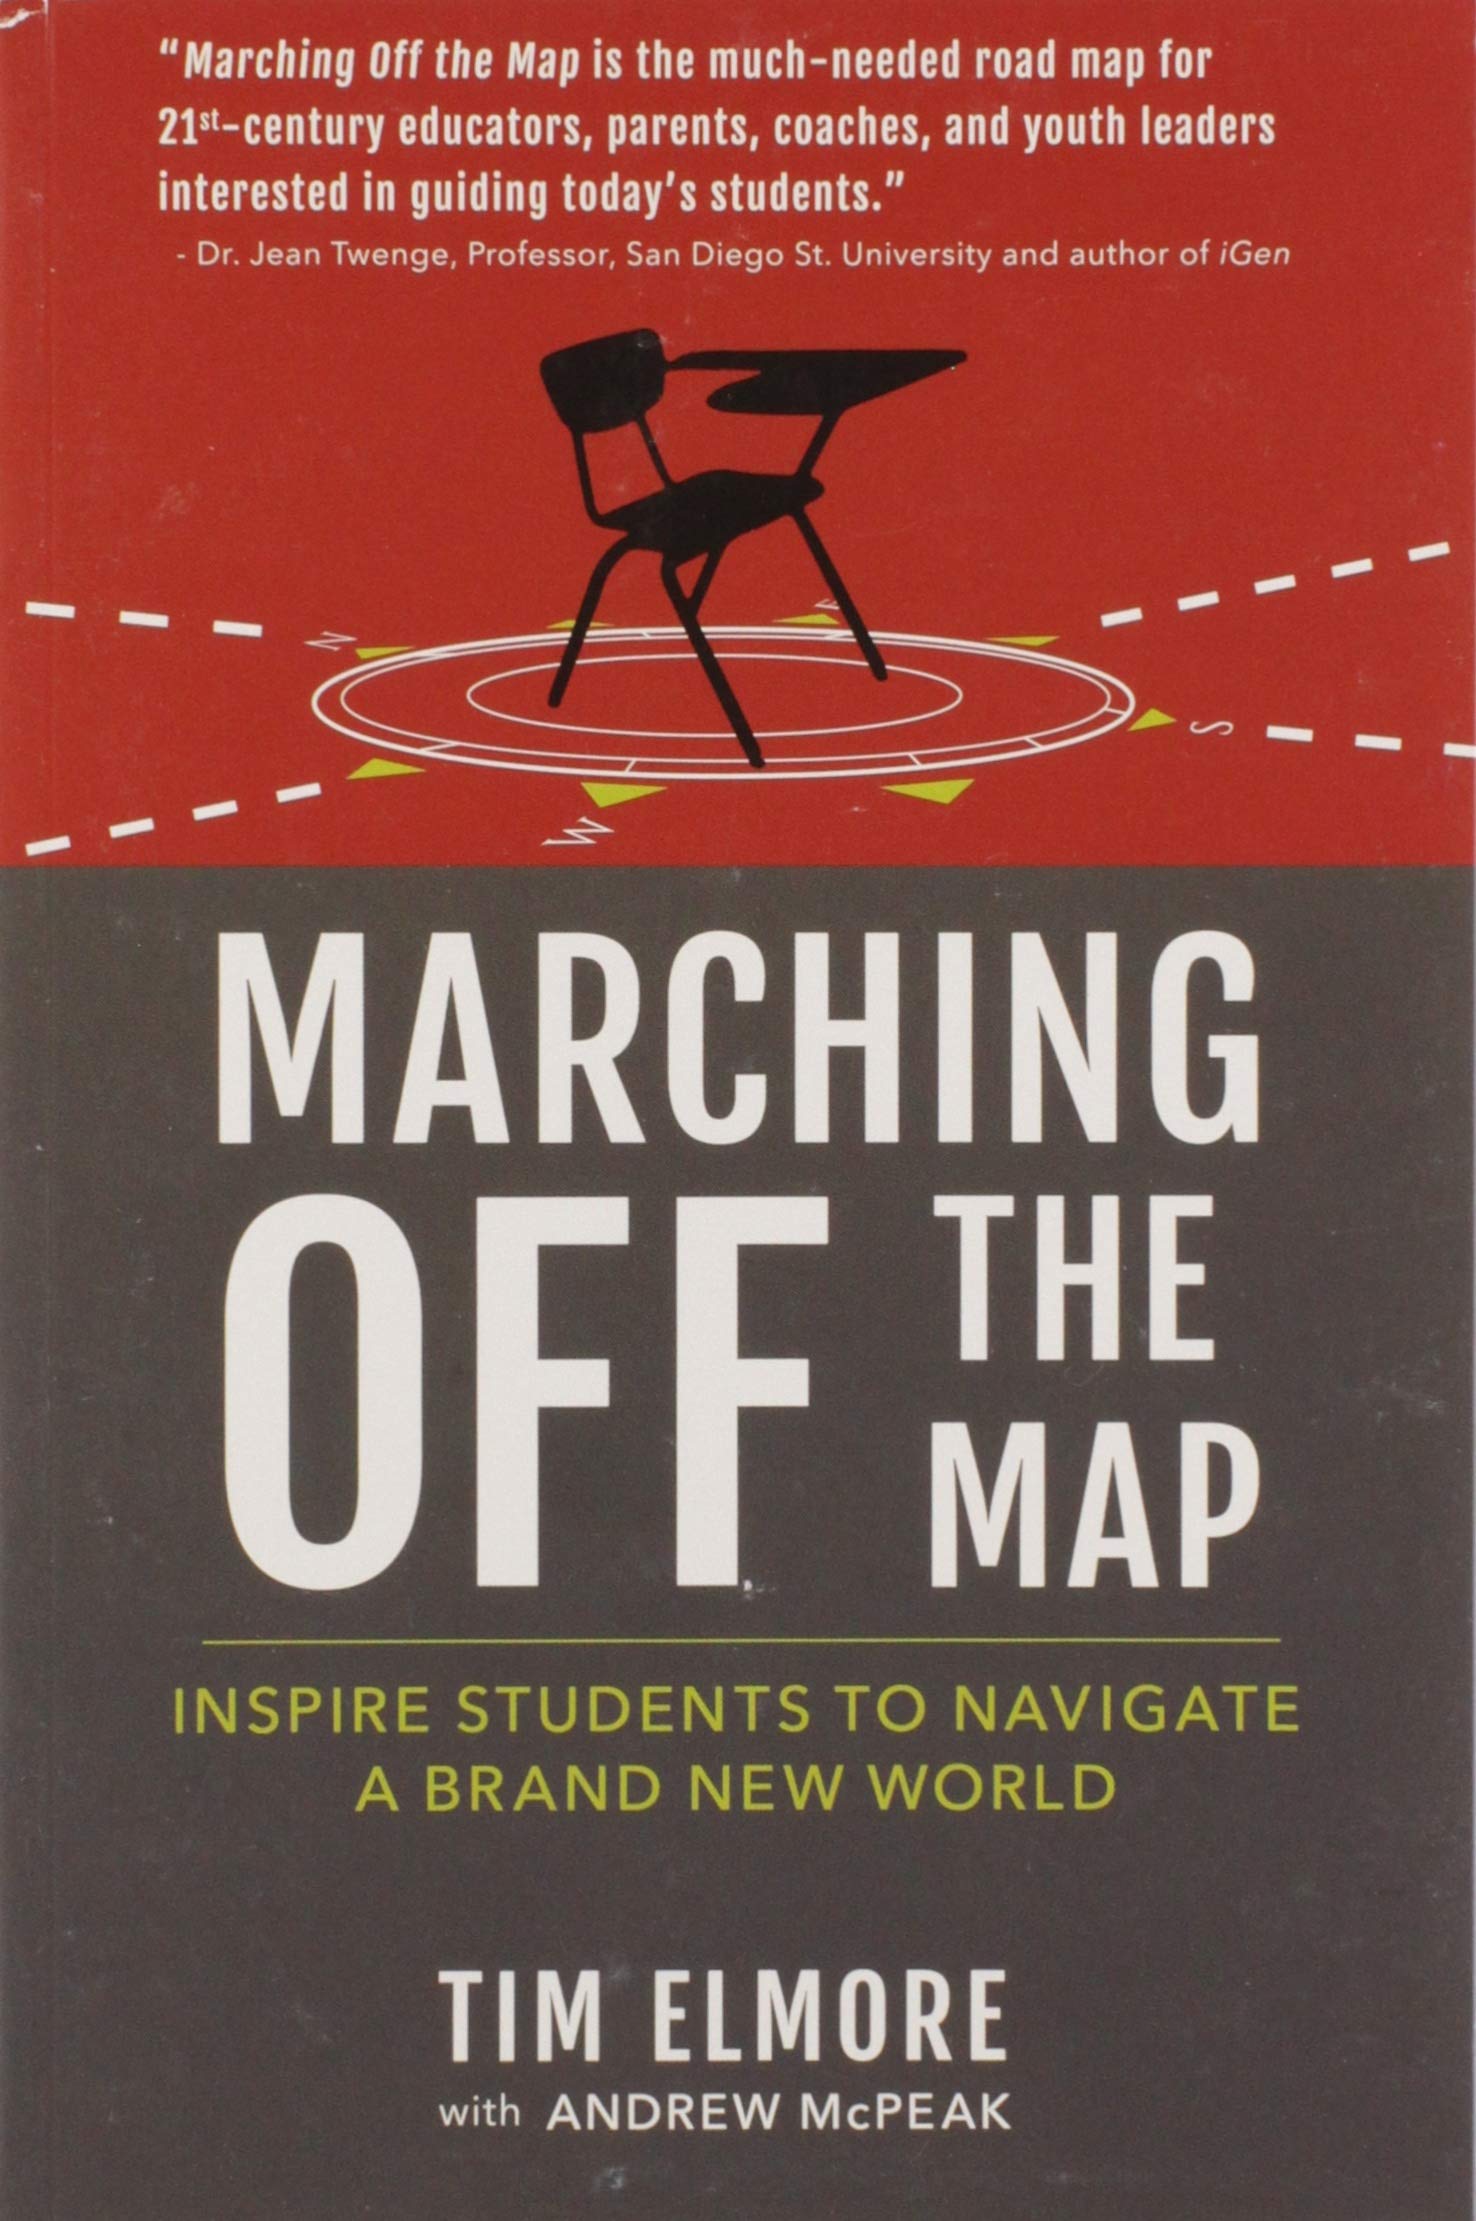 Marching off the Map by Tim Elmore